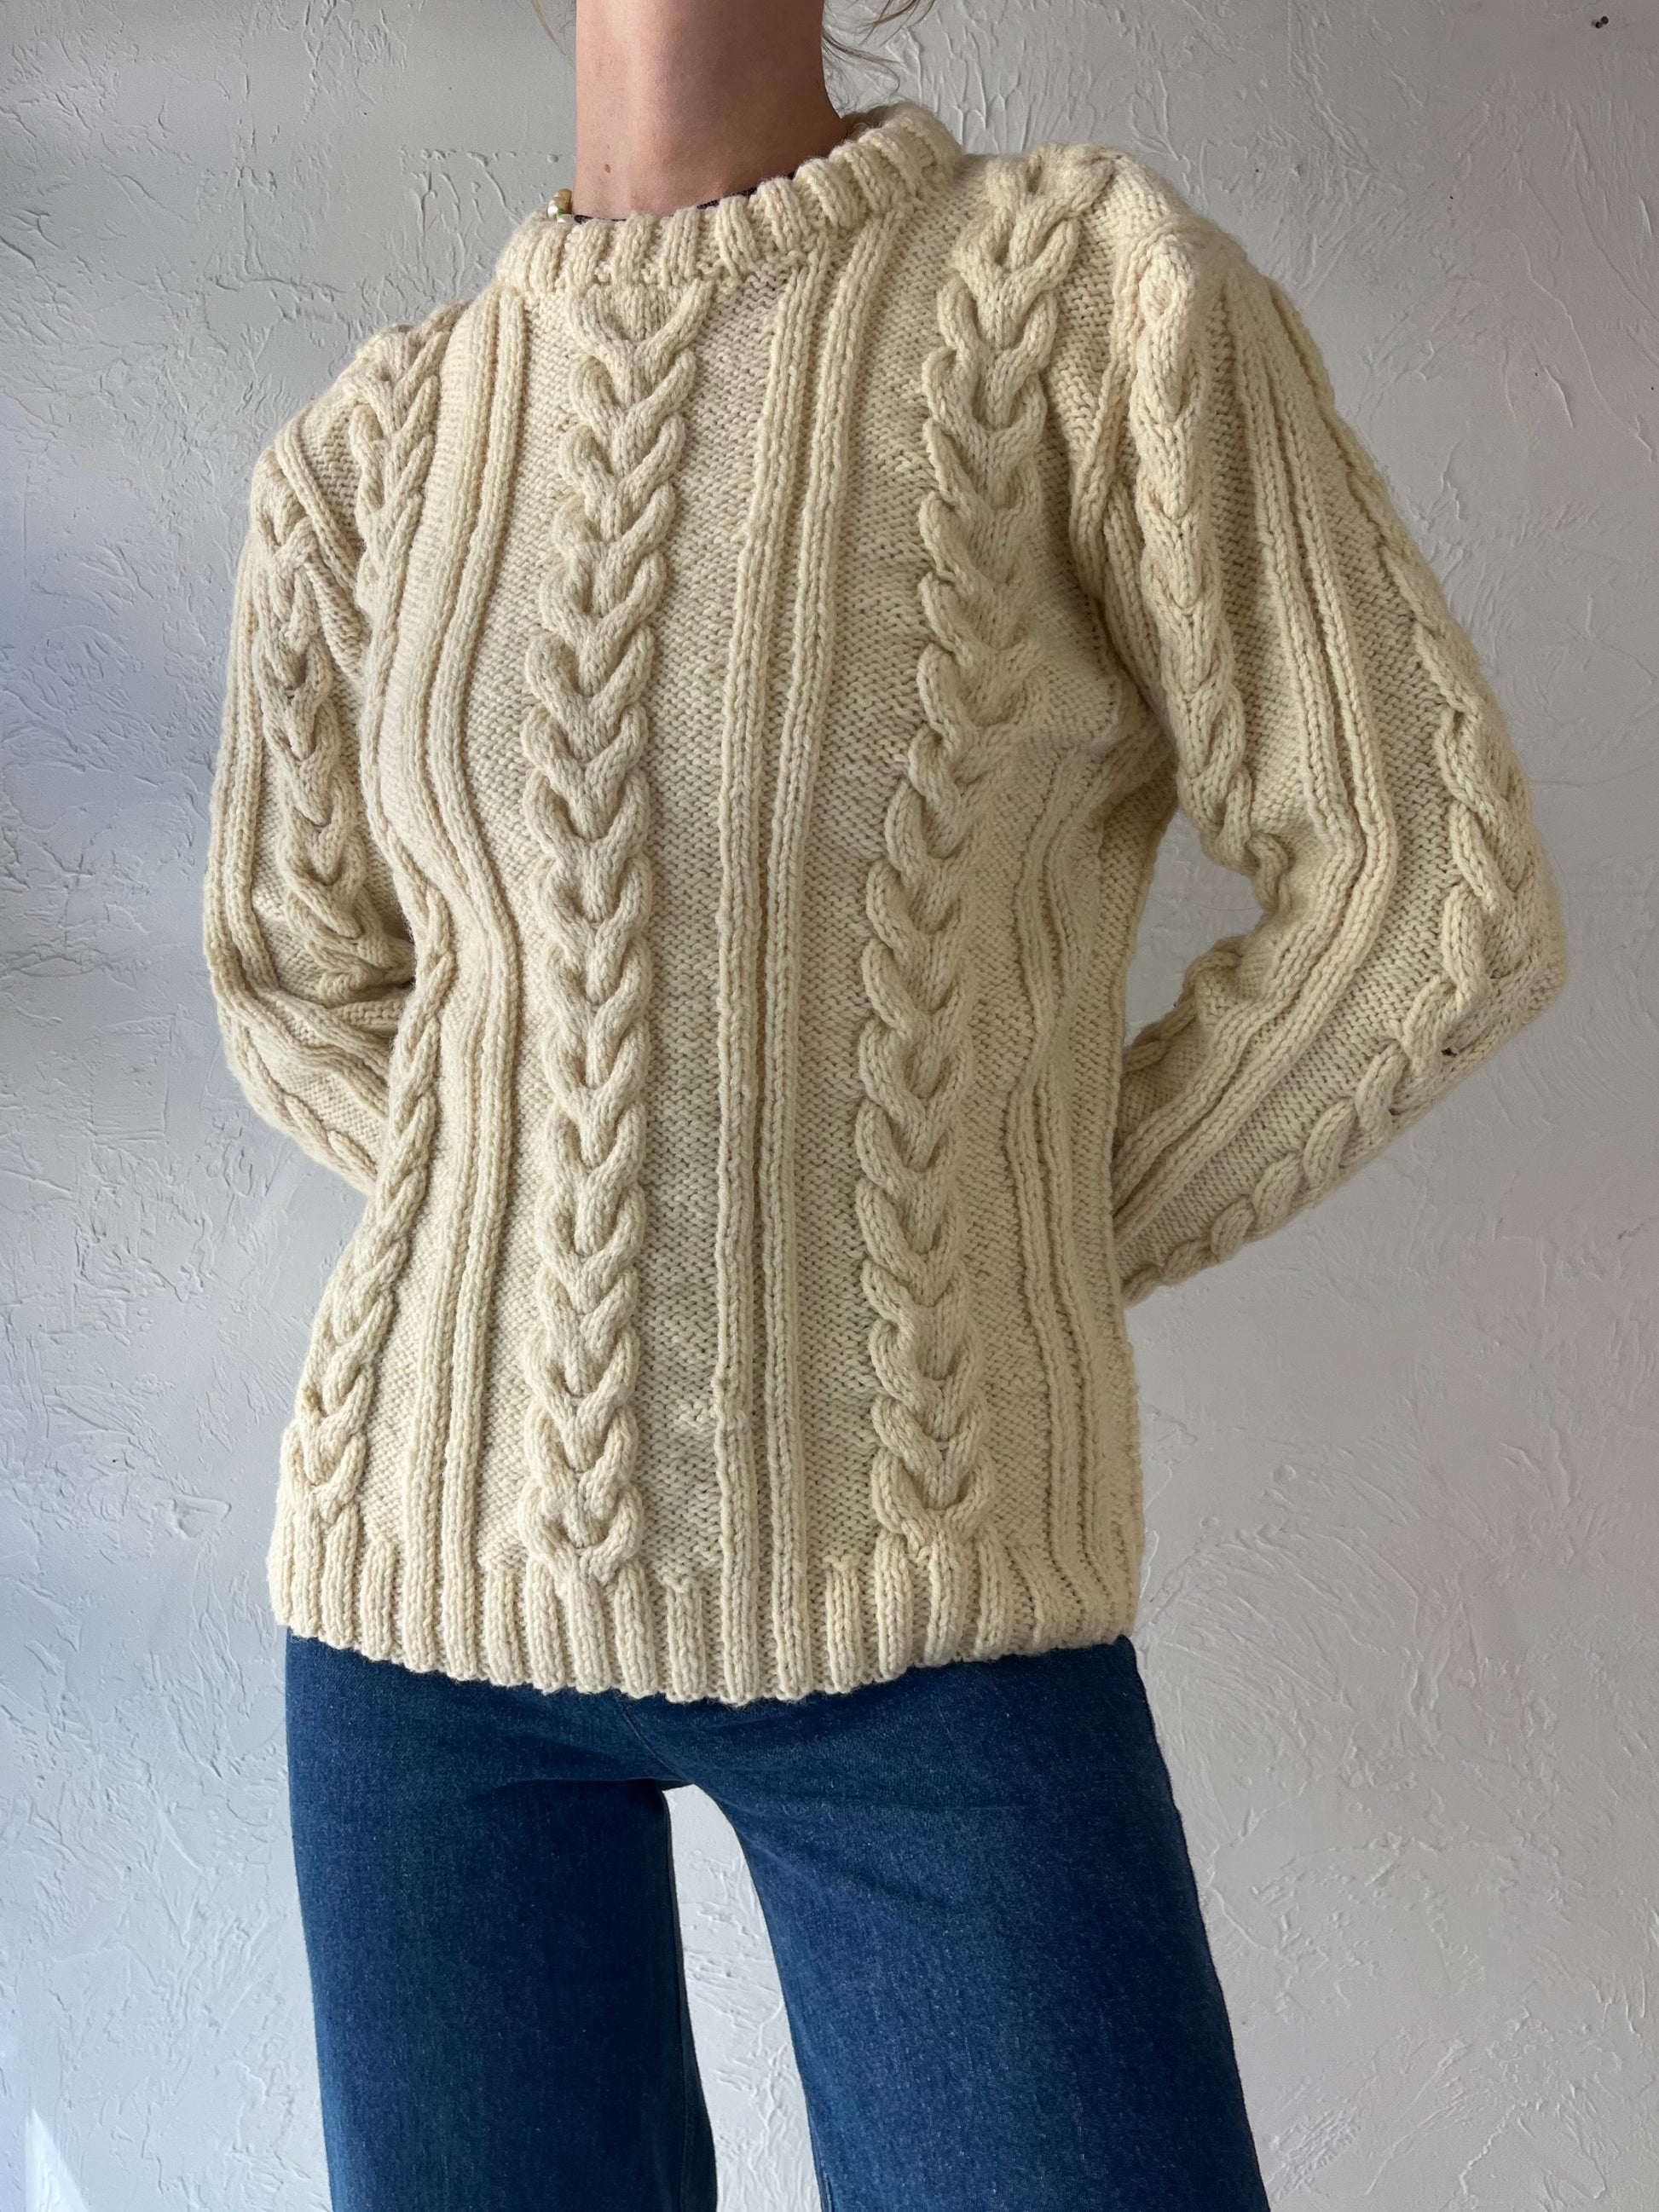 Vintage Mock Neck Cream Cable Knit Acrylic Wool Blend Sweater / Small –  Wildhoneygoods